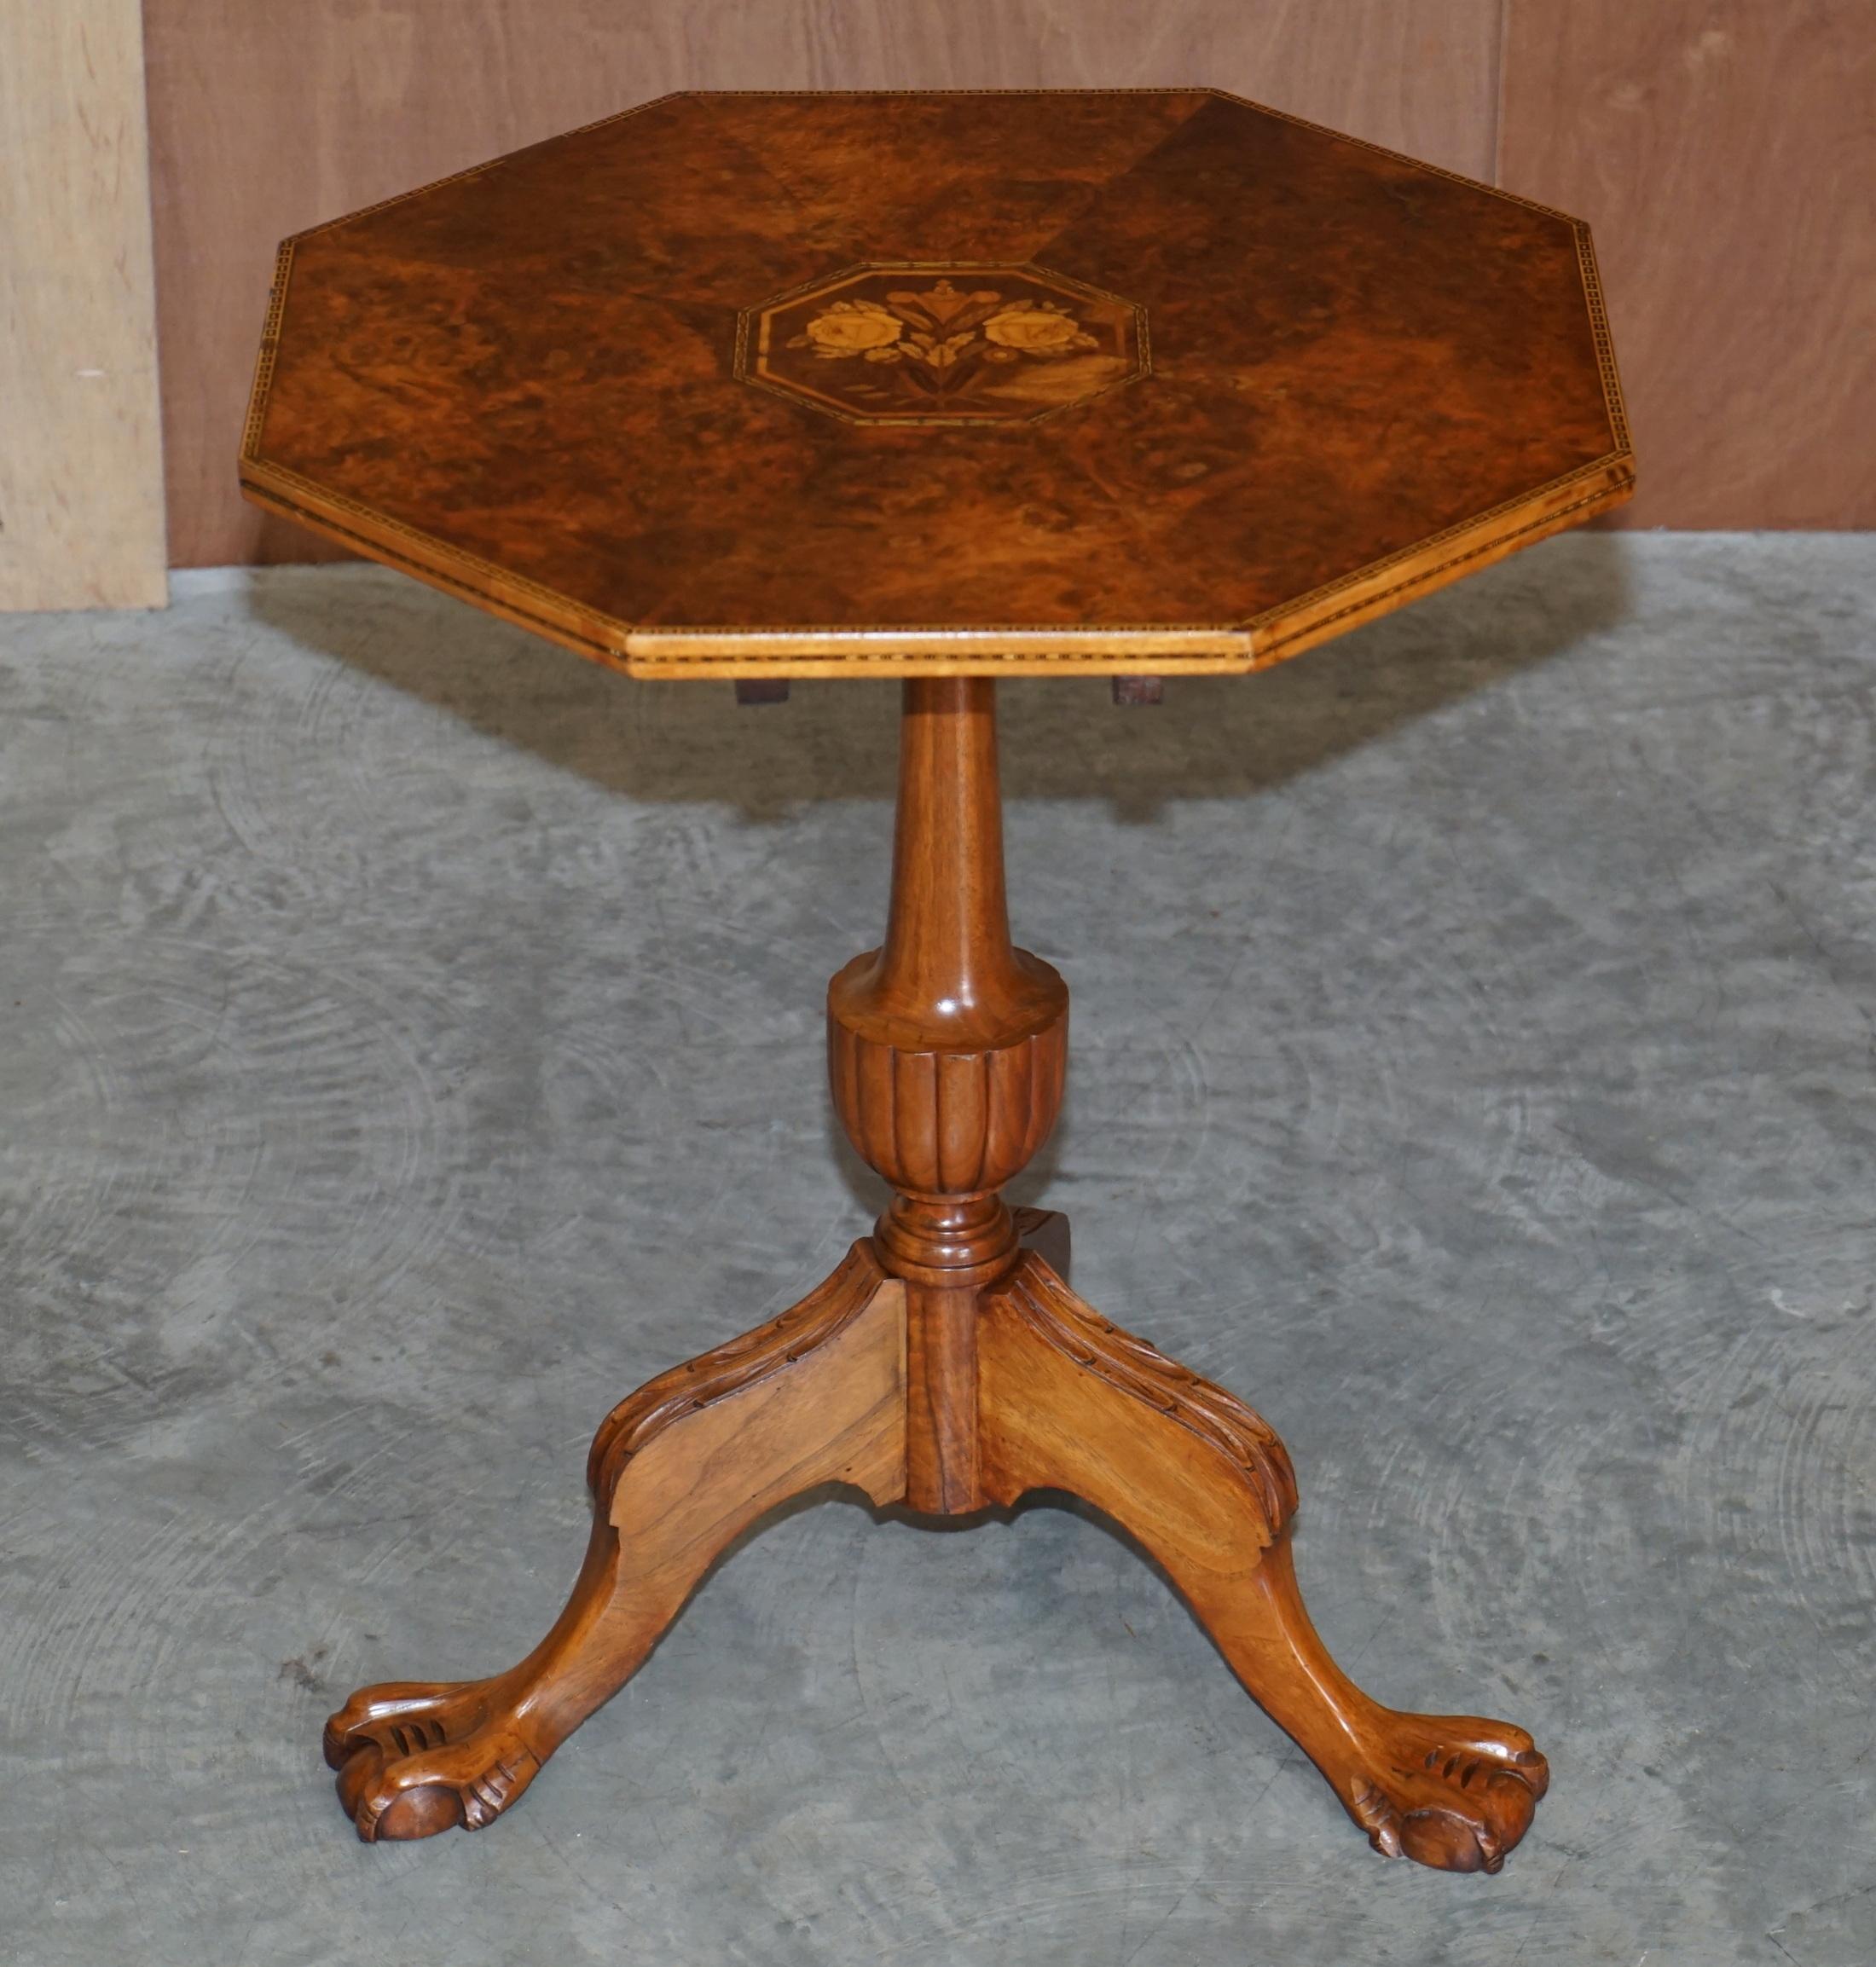 We are delighted to offer for sale this lovely early 19th century burr walnut occasional table top with birdcage mount on a later claw & ball tripod base

A very good looking and decorative tripod table. It’s very early 19th century, the timber